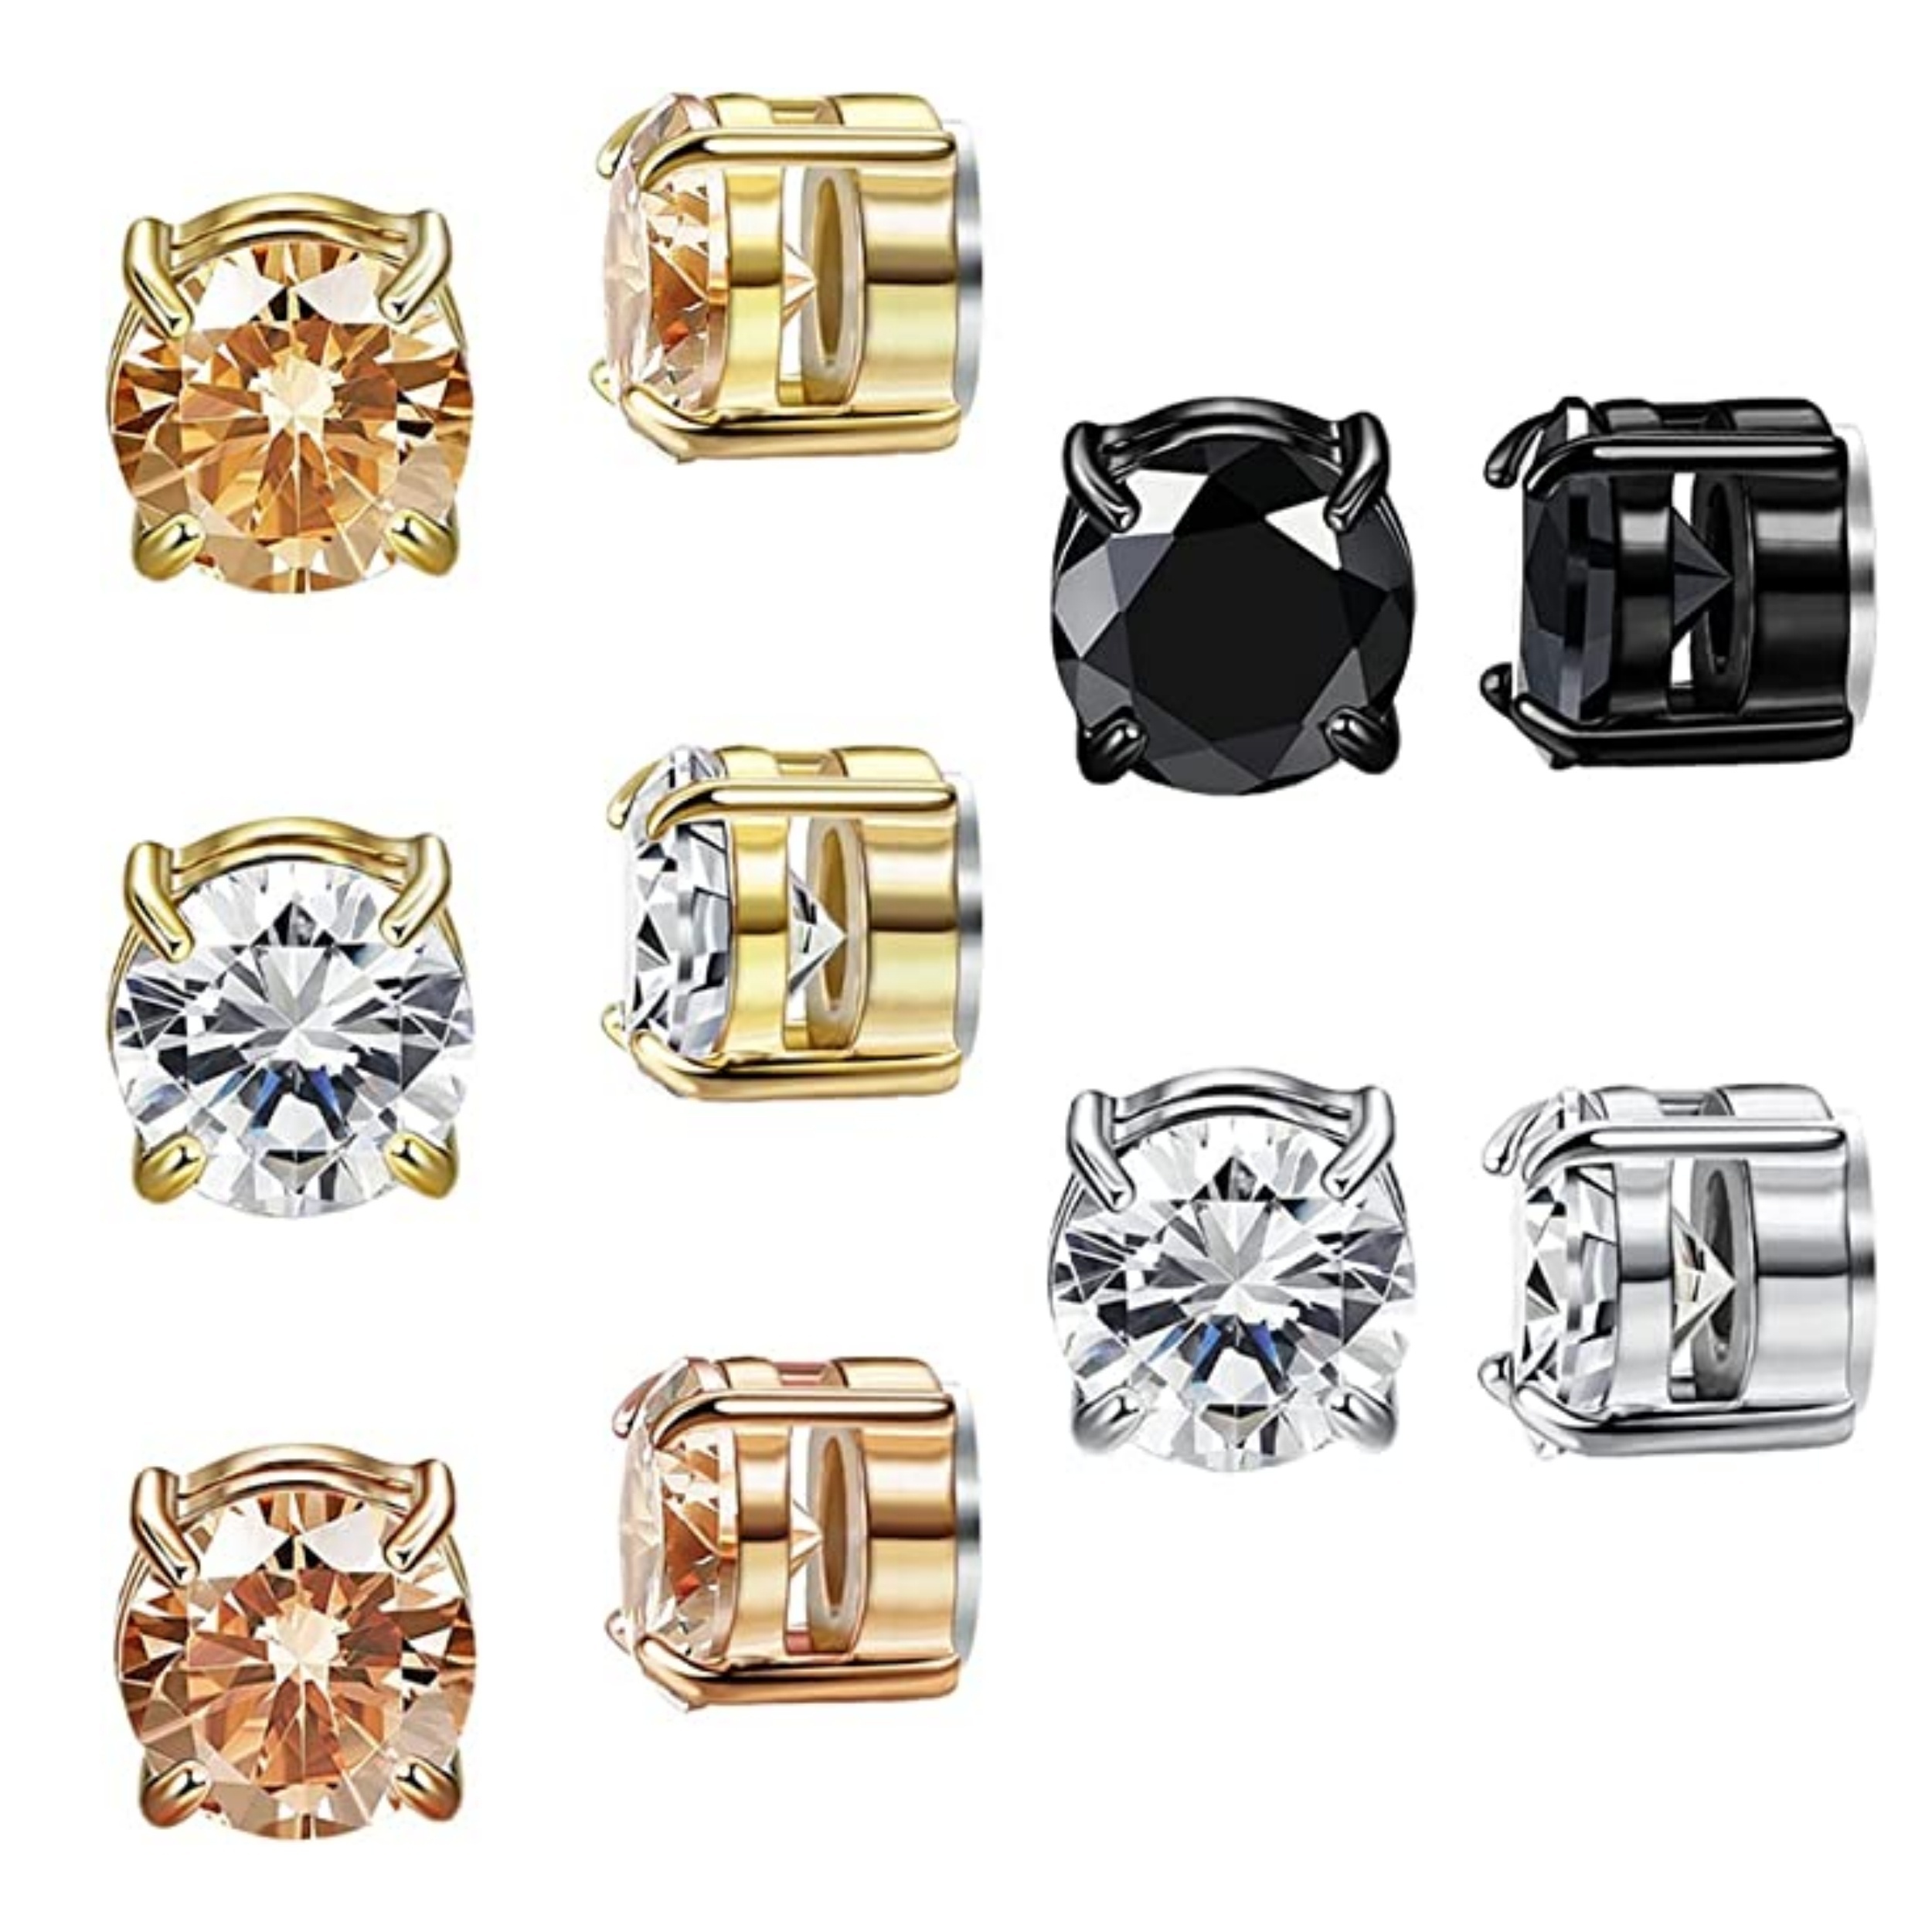 YZstyle 4 Pairs Stainless Steel Magnetic Stud Earring for Men Women CZ Magnet Non Pierced Clip on Earrings Set 8mm